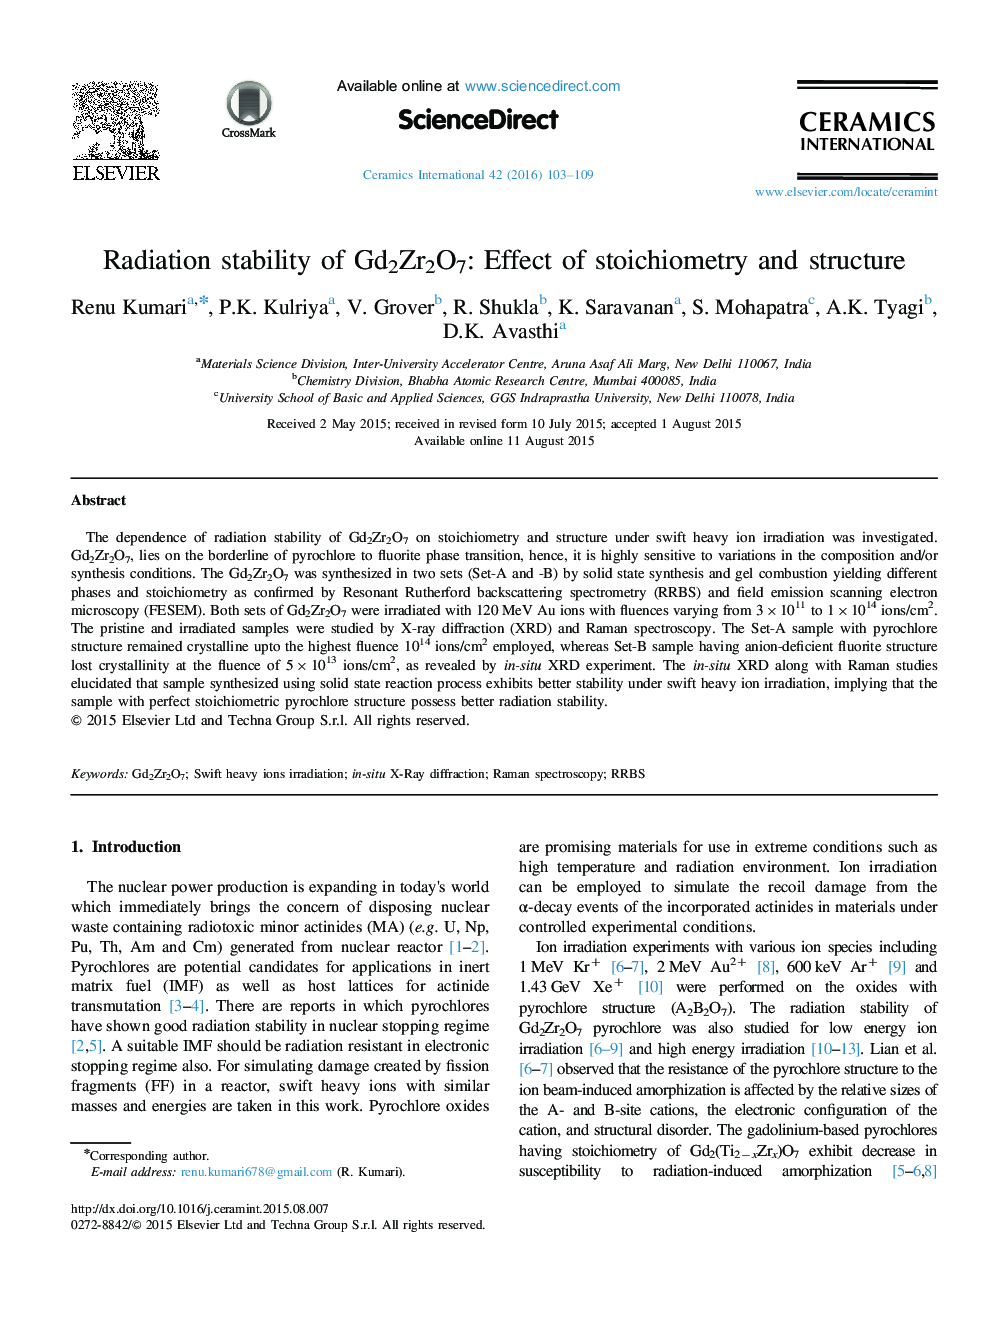 Radiation stability of Gd2Zr2O7: Effect of stoichiometry and structure